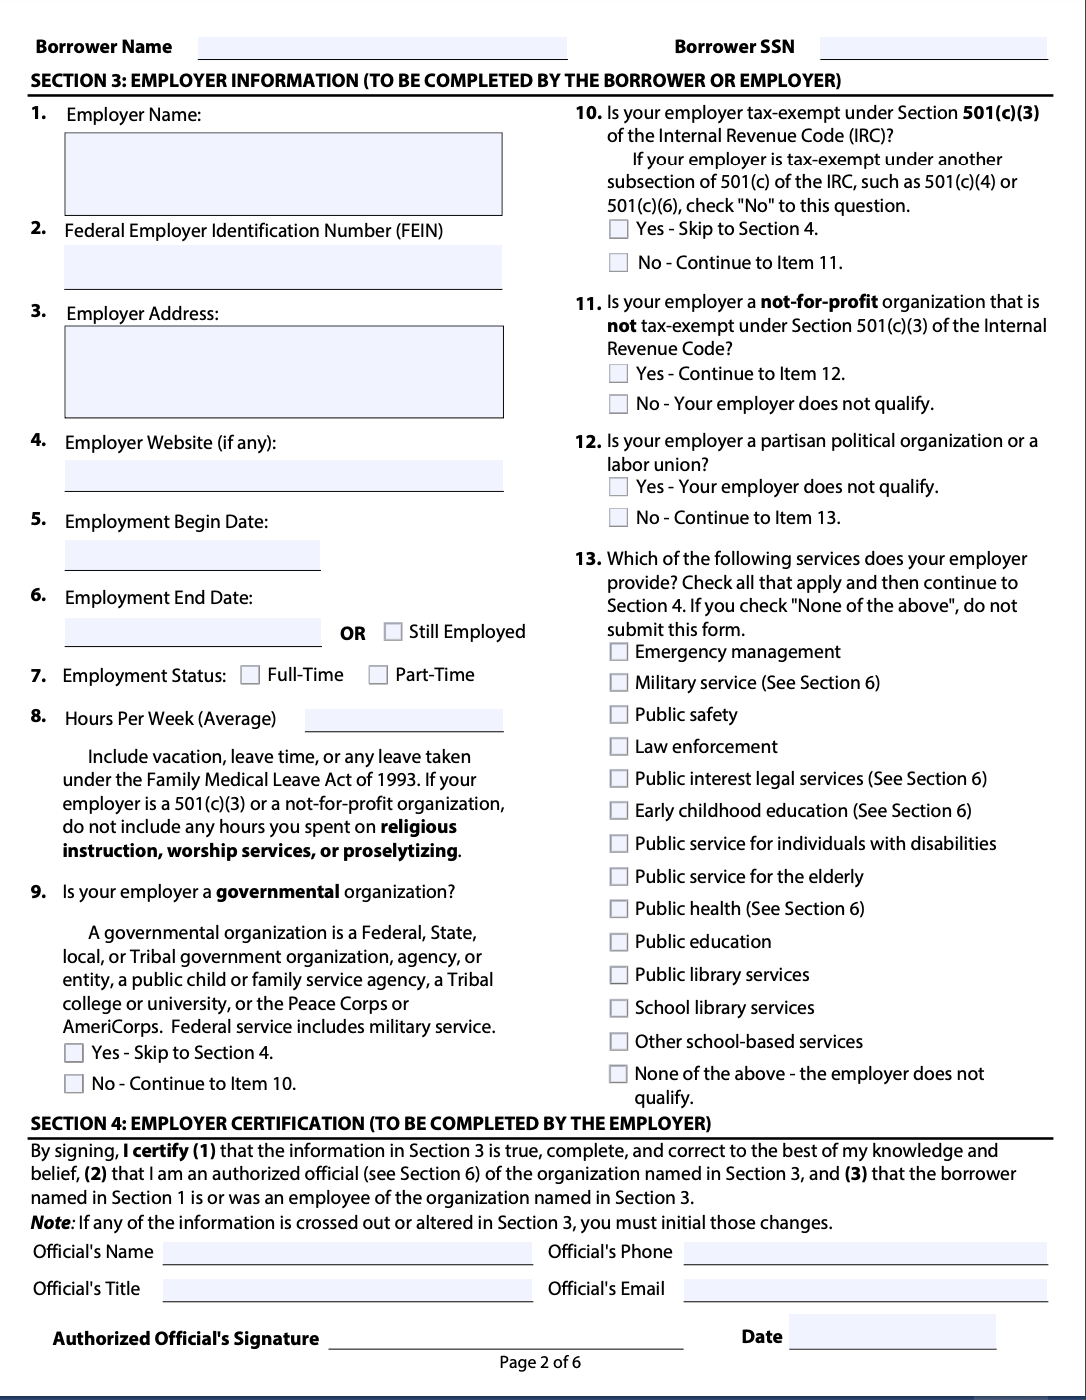 PSLF Form Submission